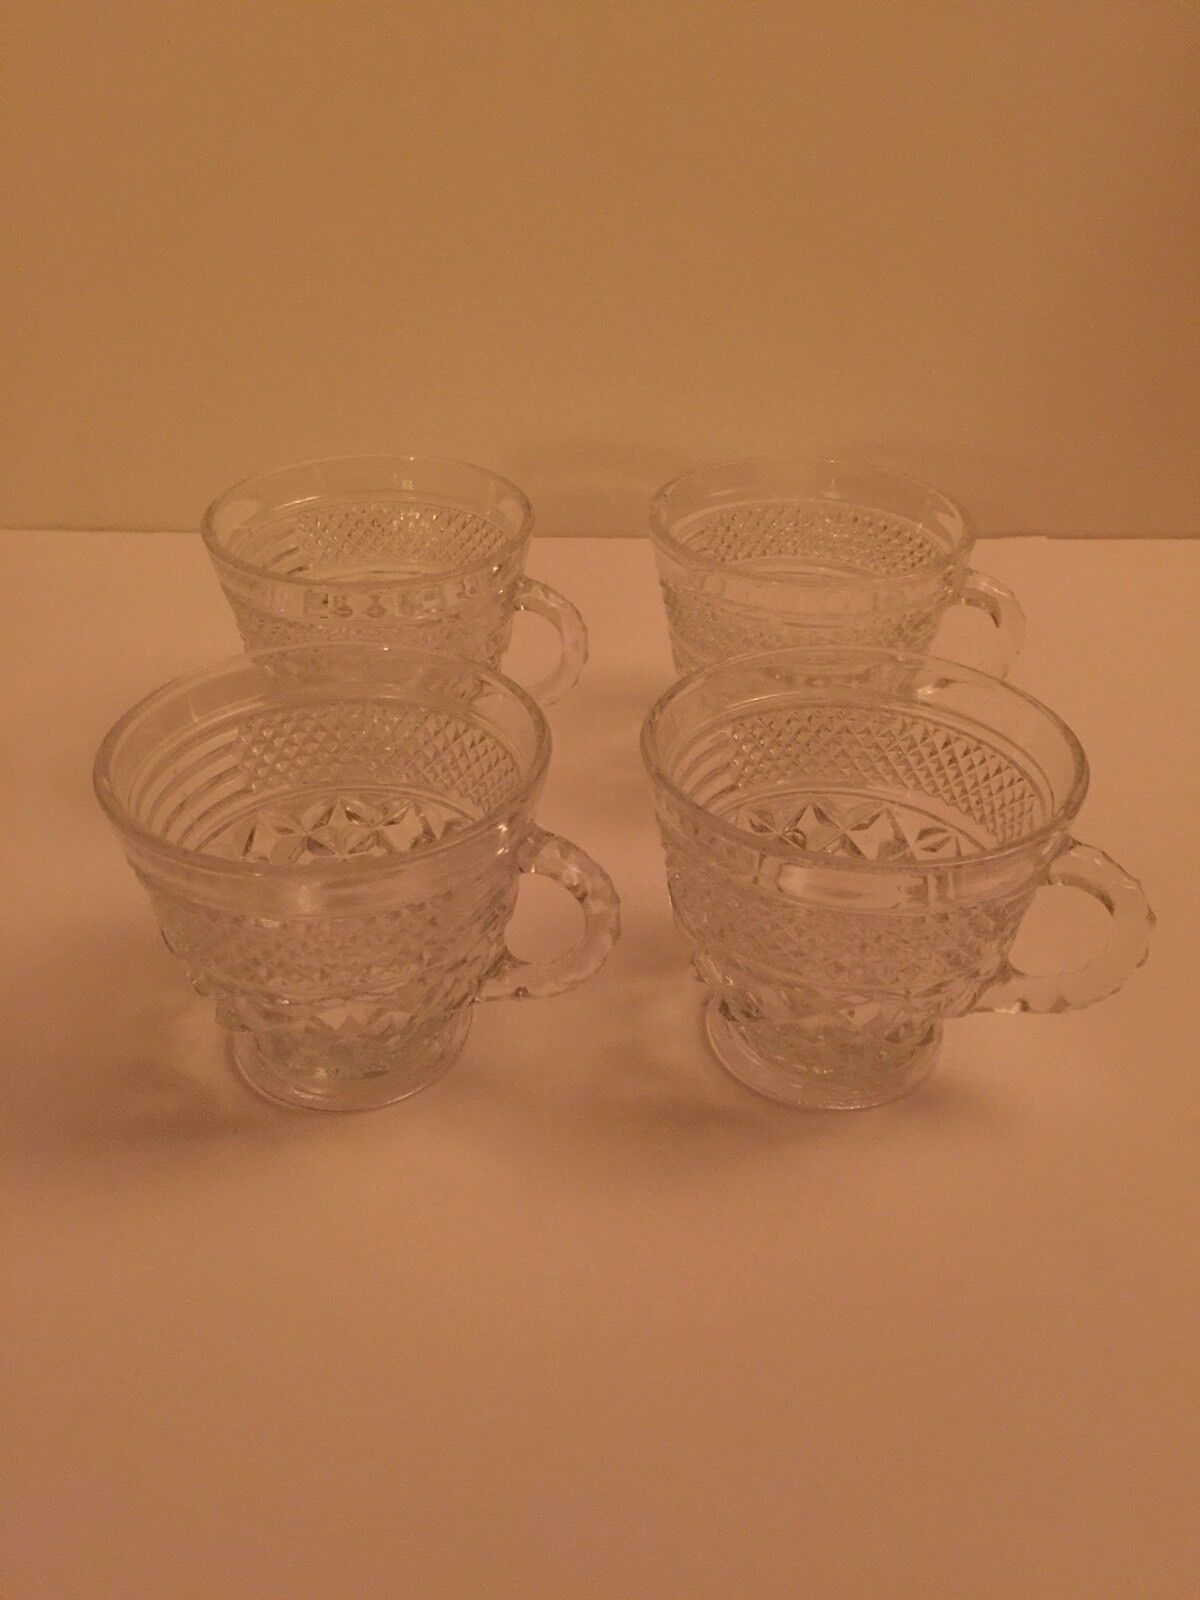 Four(4) Vintage Anchor Hocking Wexford Cups - 3” tall - Perfect